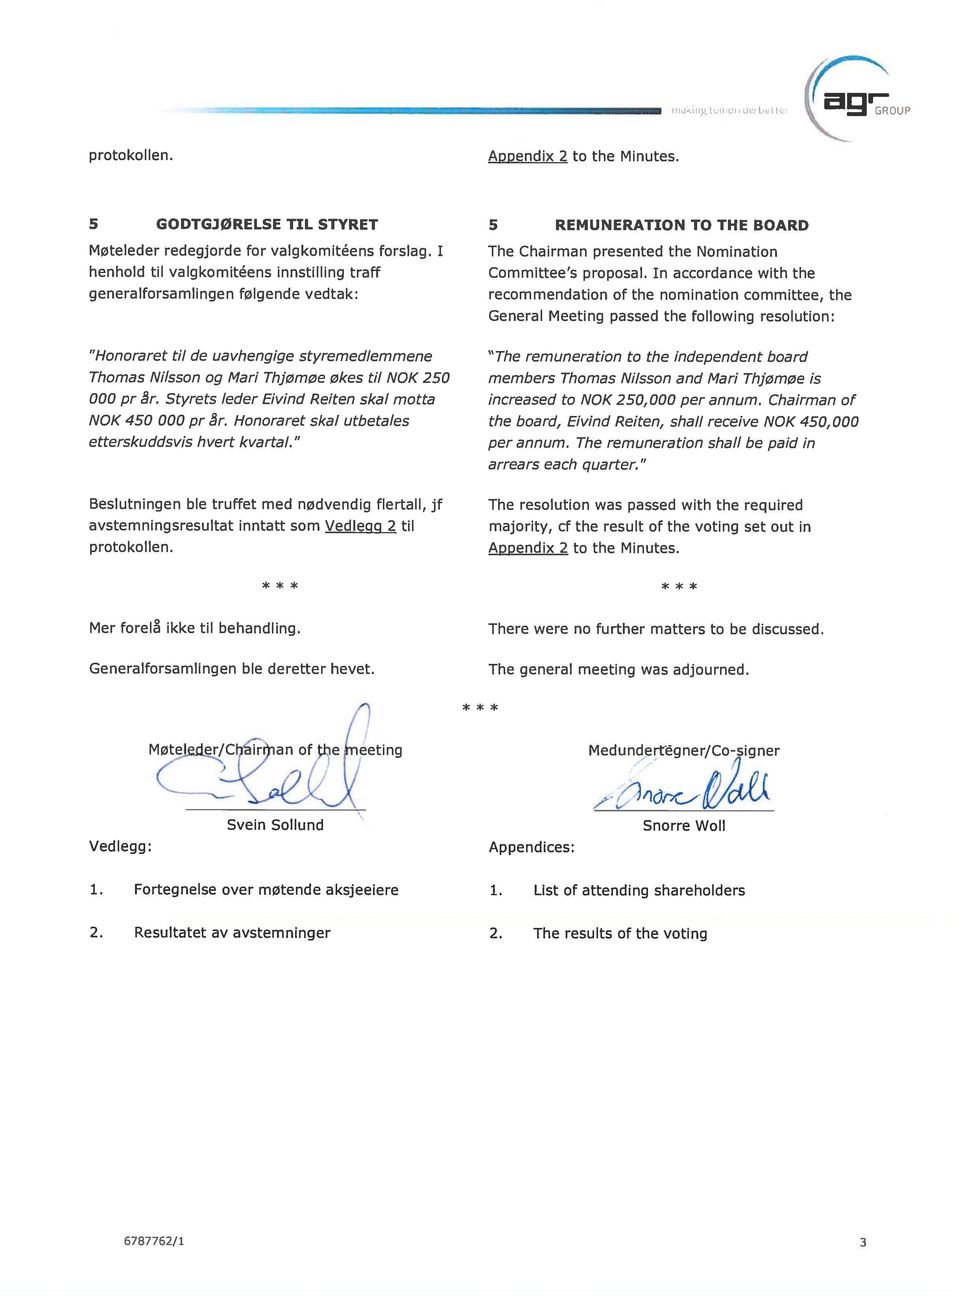 In accordance with the recommendation of the nomination committee, the General Meeting passed the following resolution: Honoraret til de uavhengige styremedlemmene Thomas Nilsson og Man Thjømøe økes